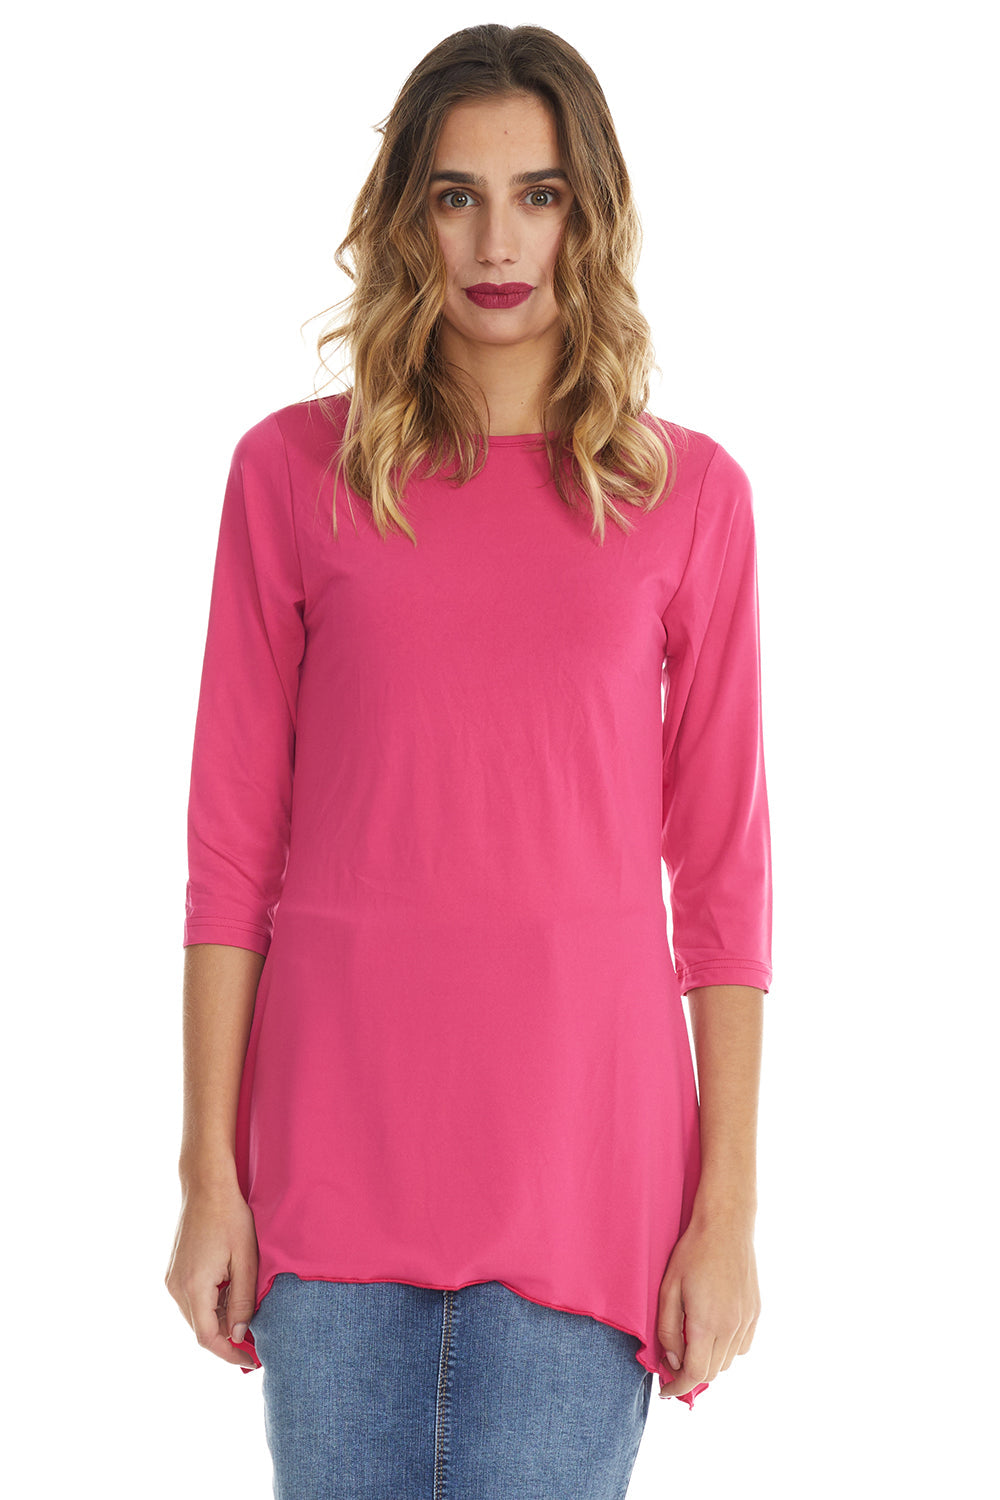 long pink tee for women 